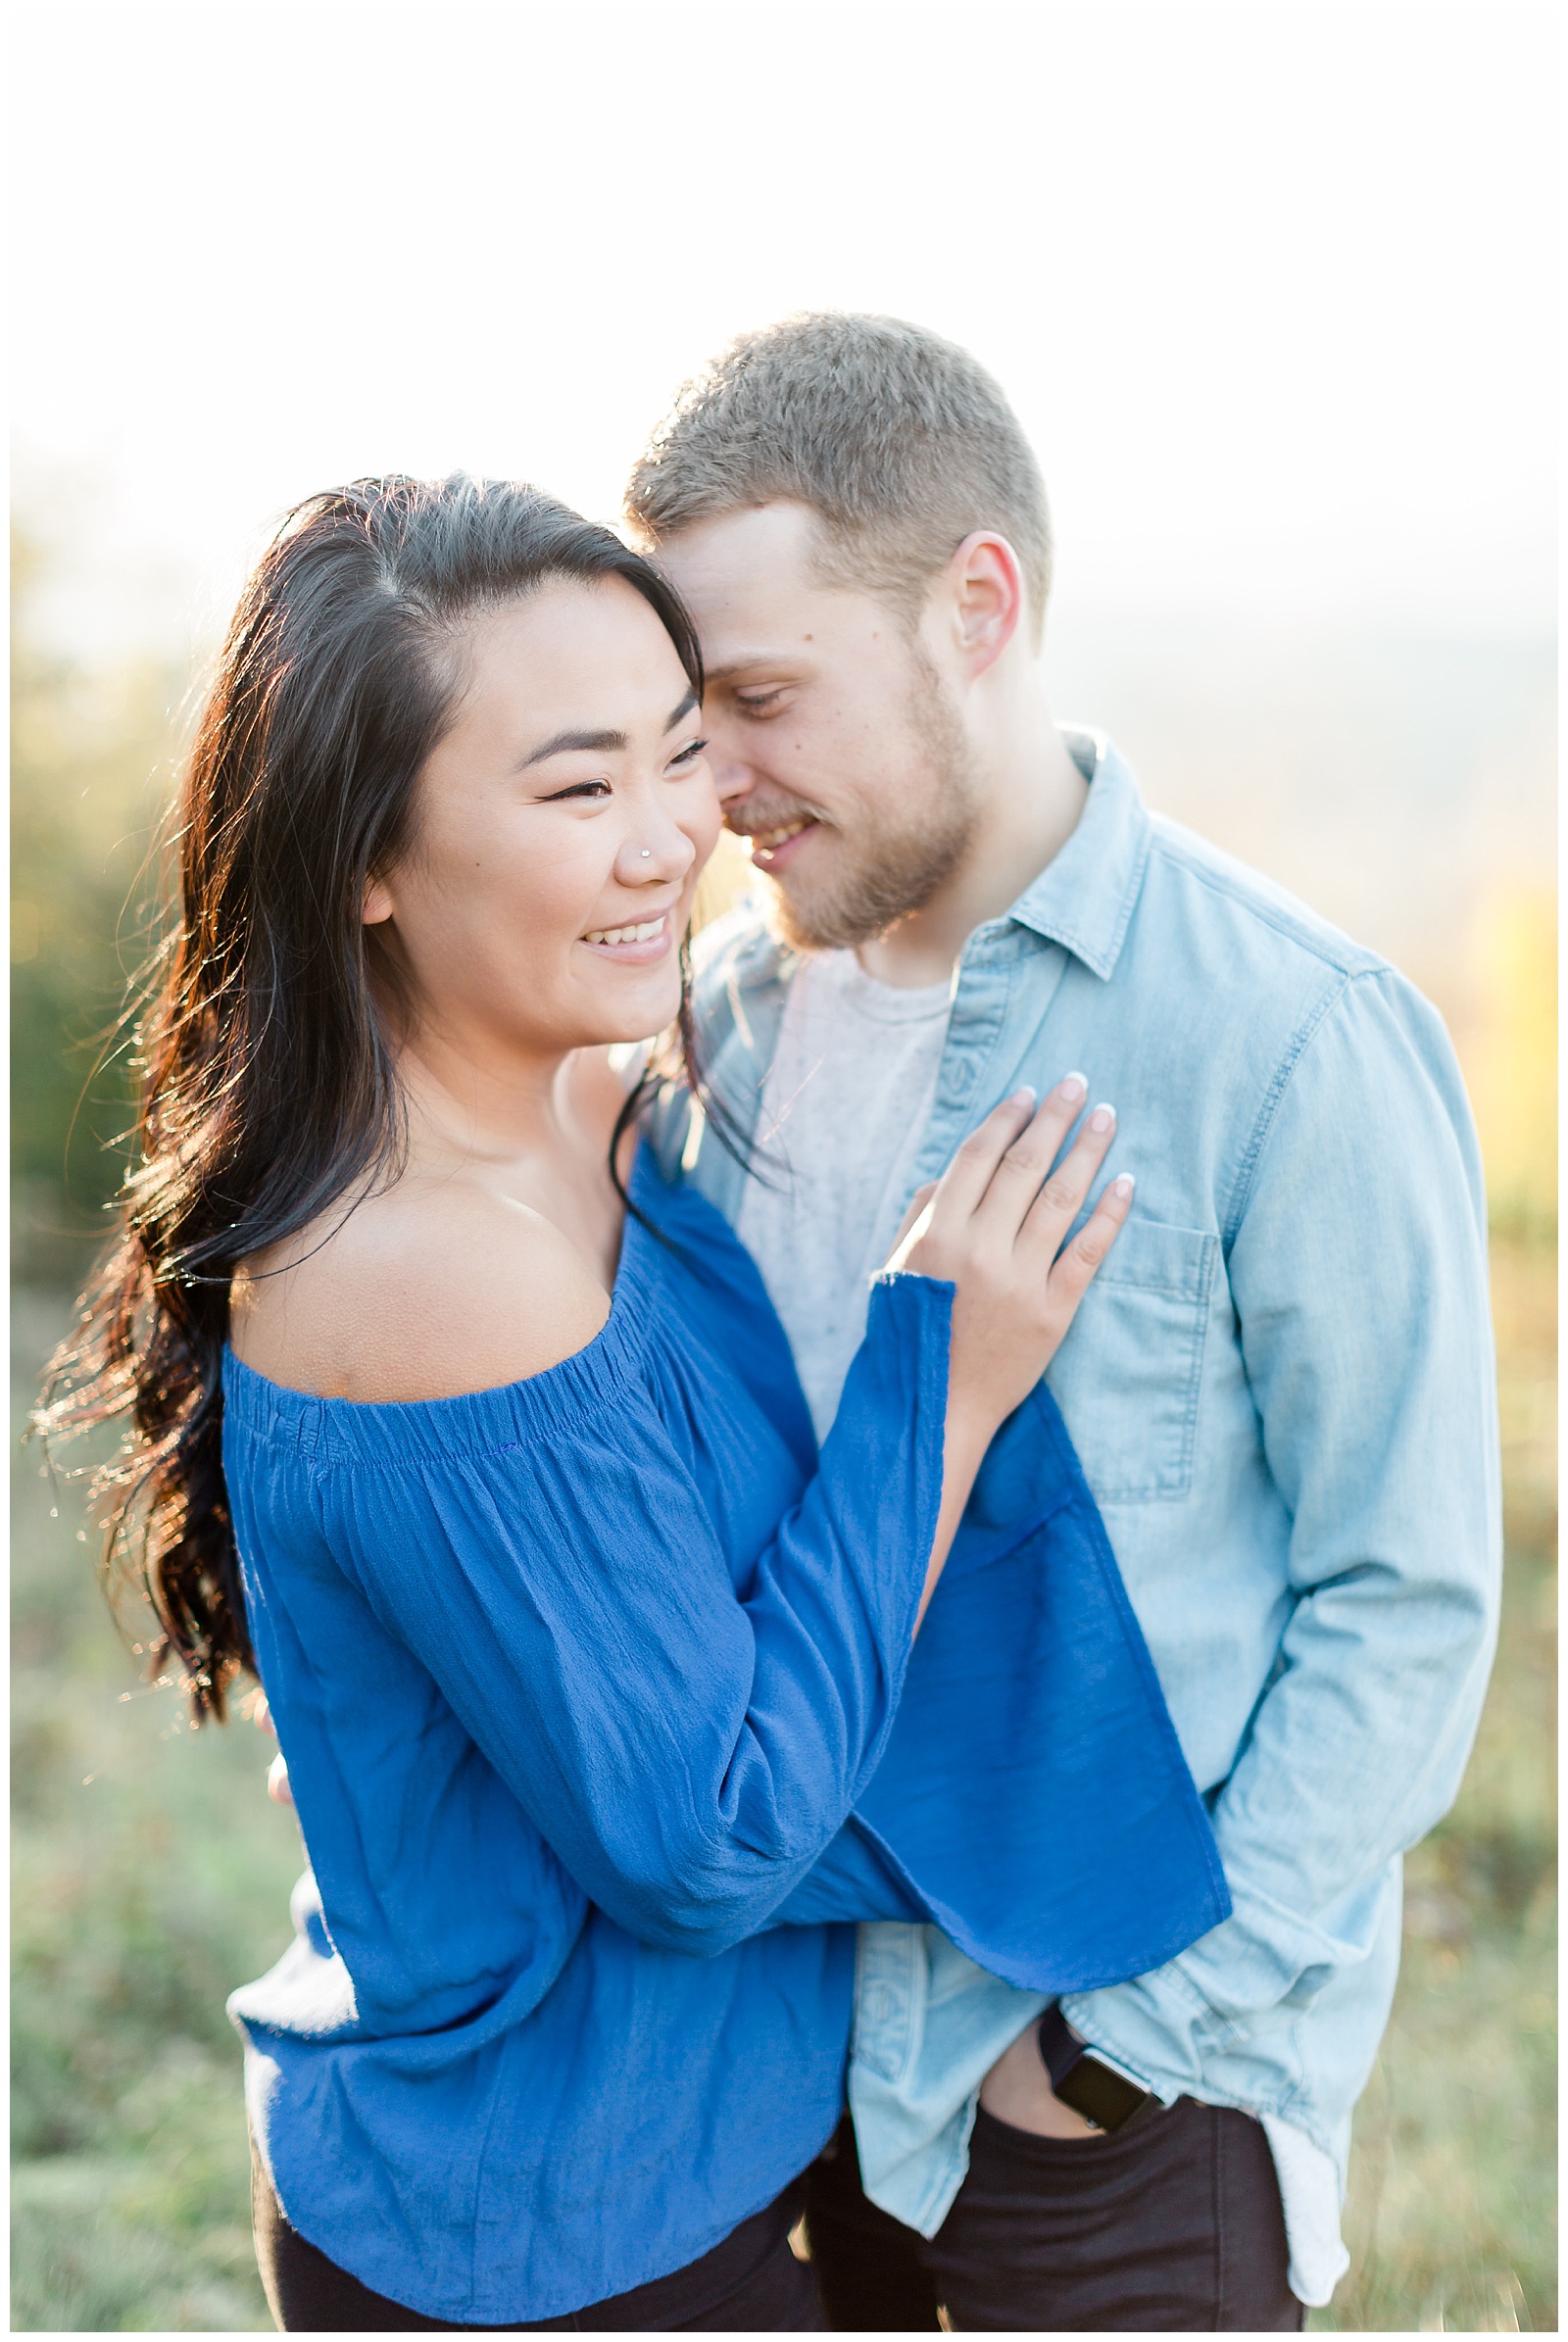 timber-hollow-overlook-engagement-session-36.jpg